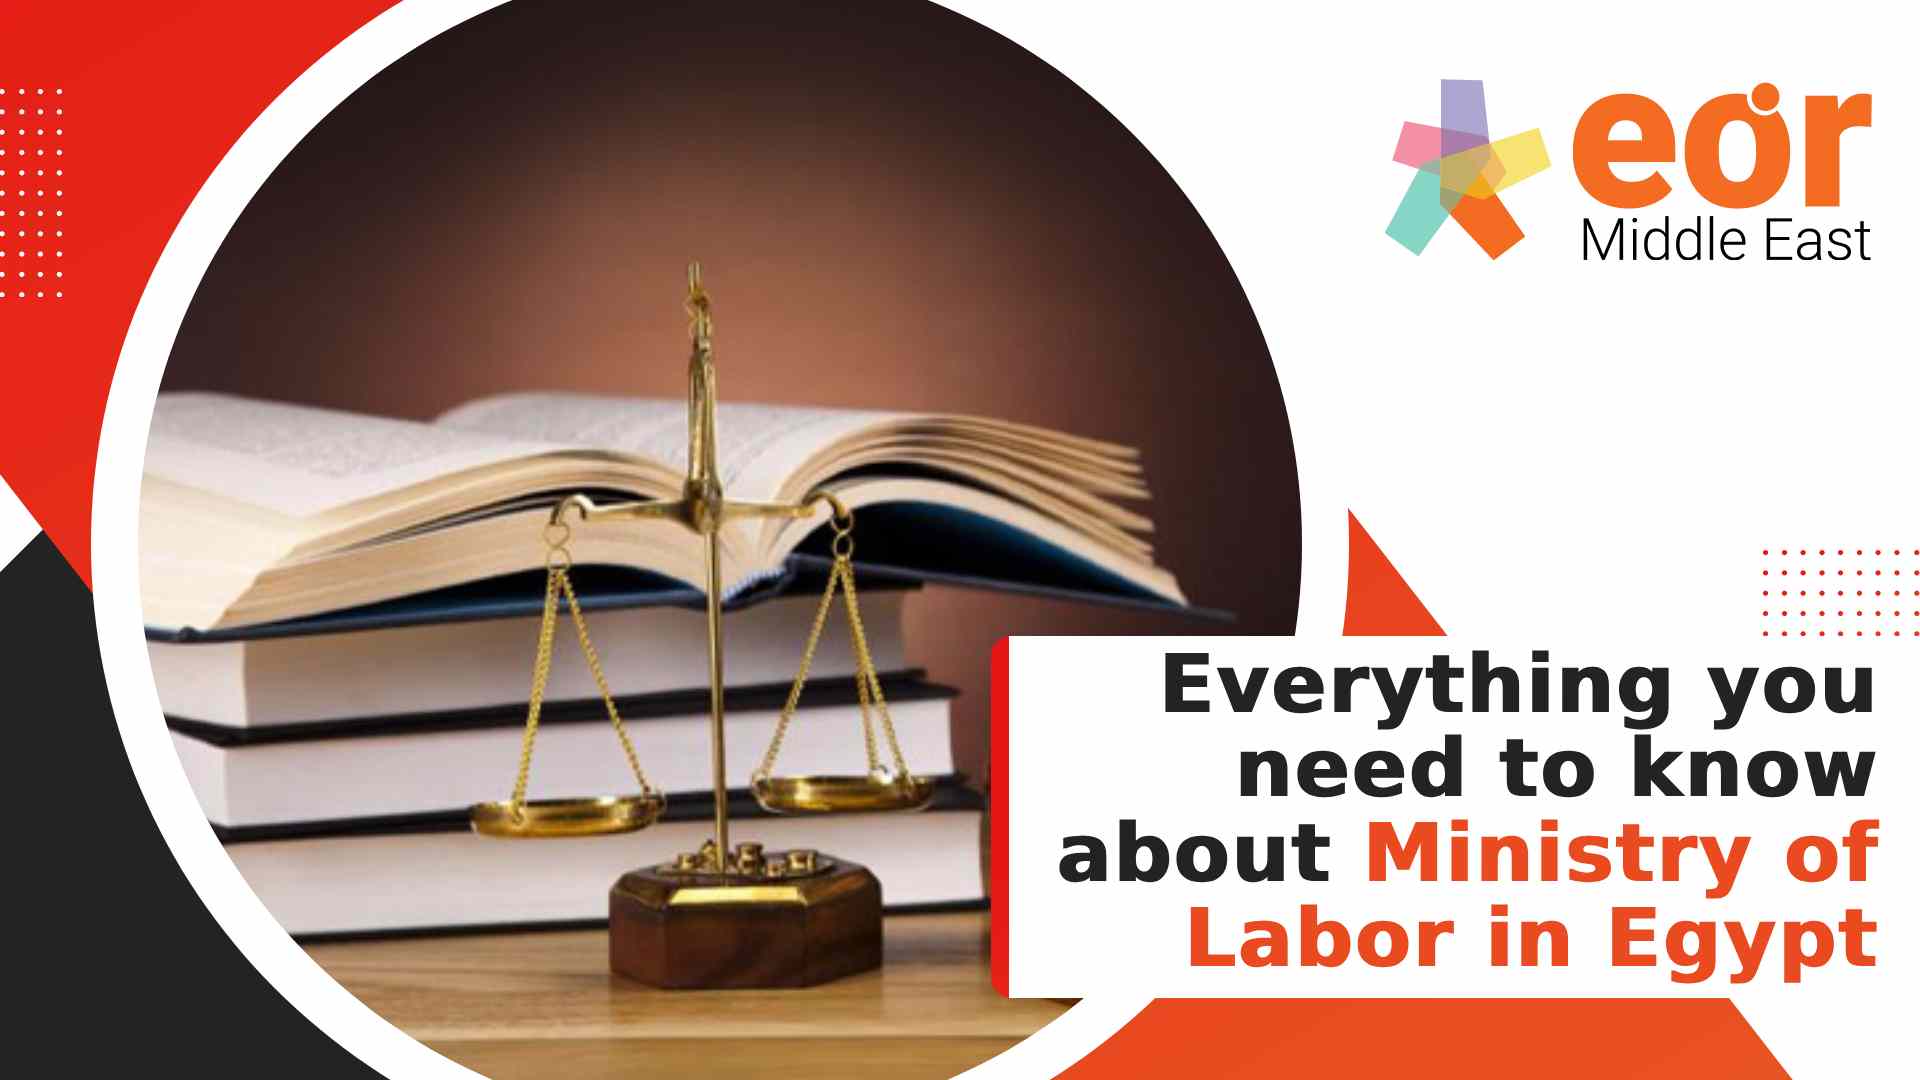 Ministry of Labor Egypt